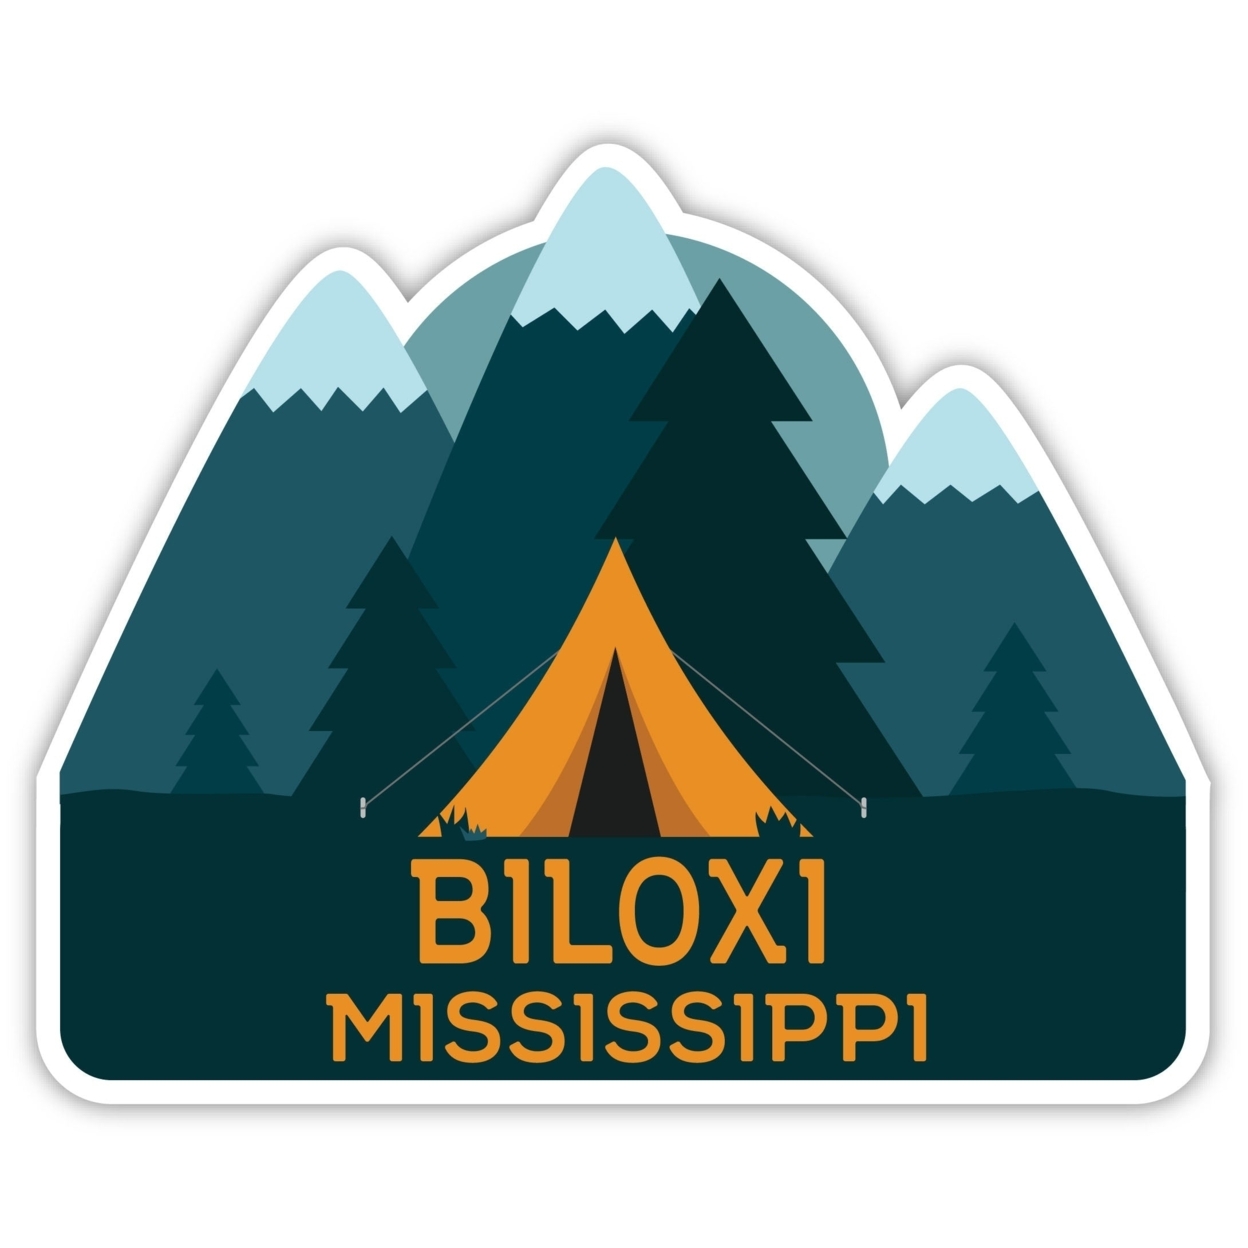 Biloxi Mississippi Souvenir Decorative Stickers (Choose Theme And Size) - 4-Pack, 12-Inch, Tent